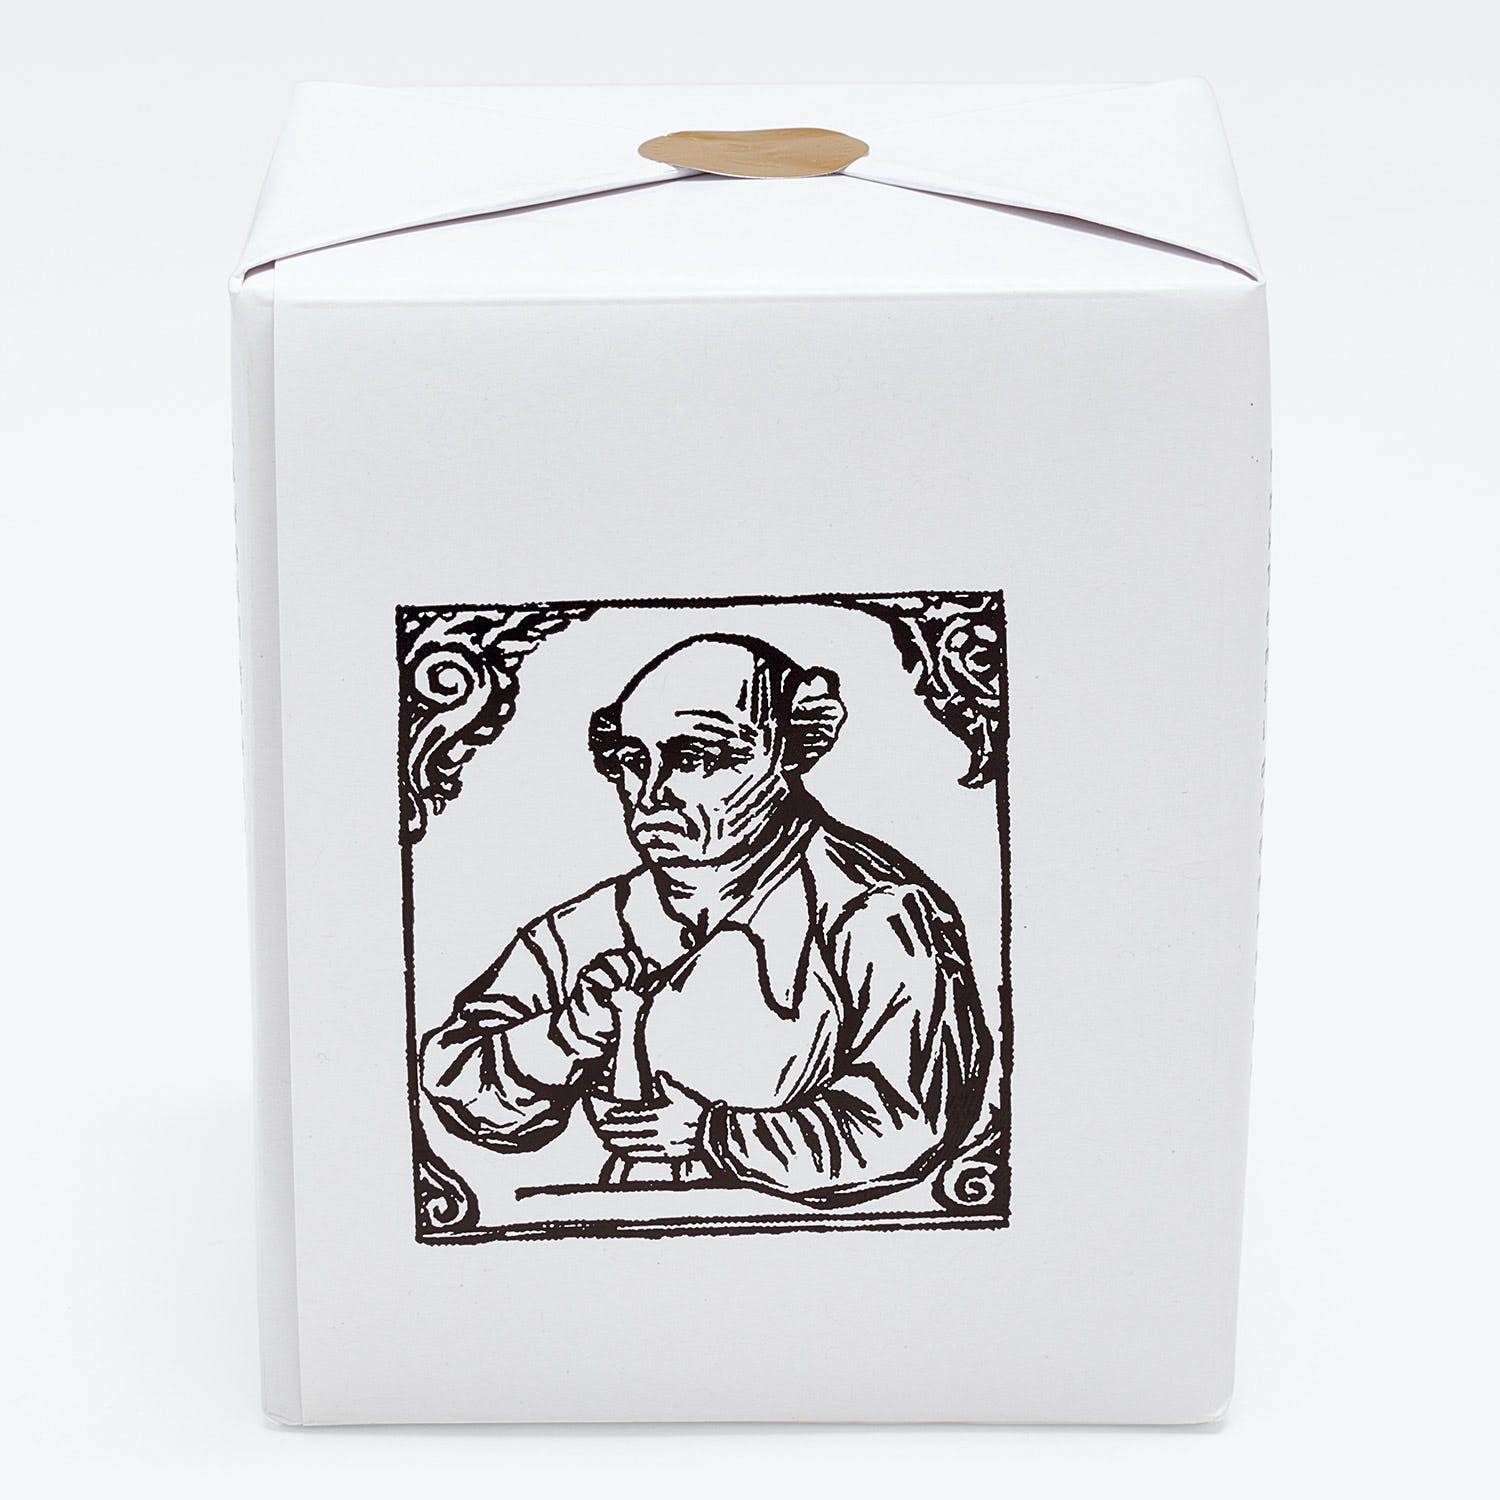 Vintage-inspired box featuring Renaissance-style woodcut print of a scholarly figure.